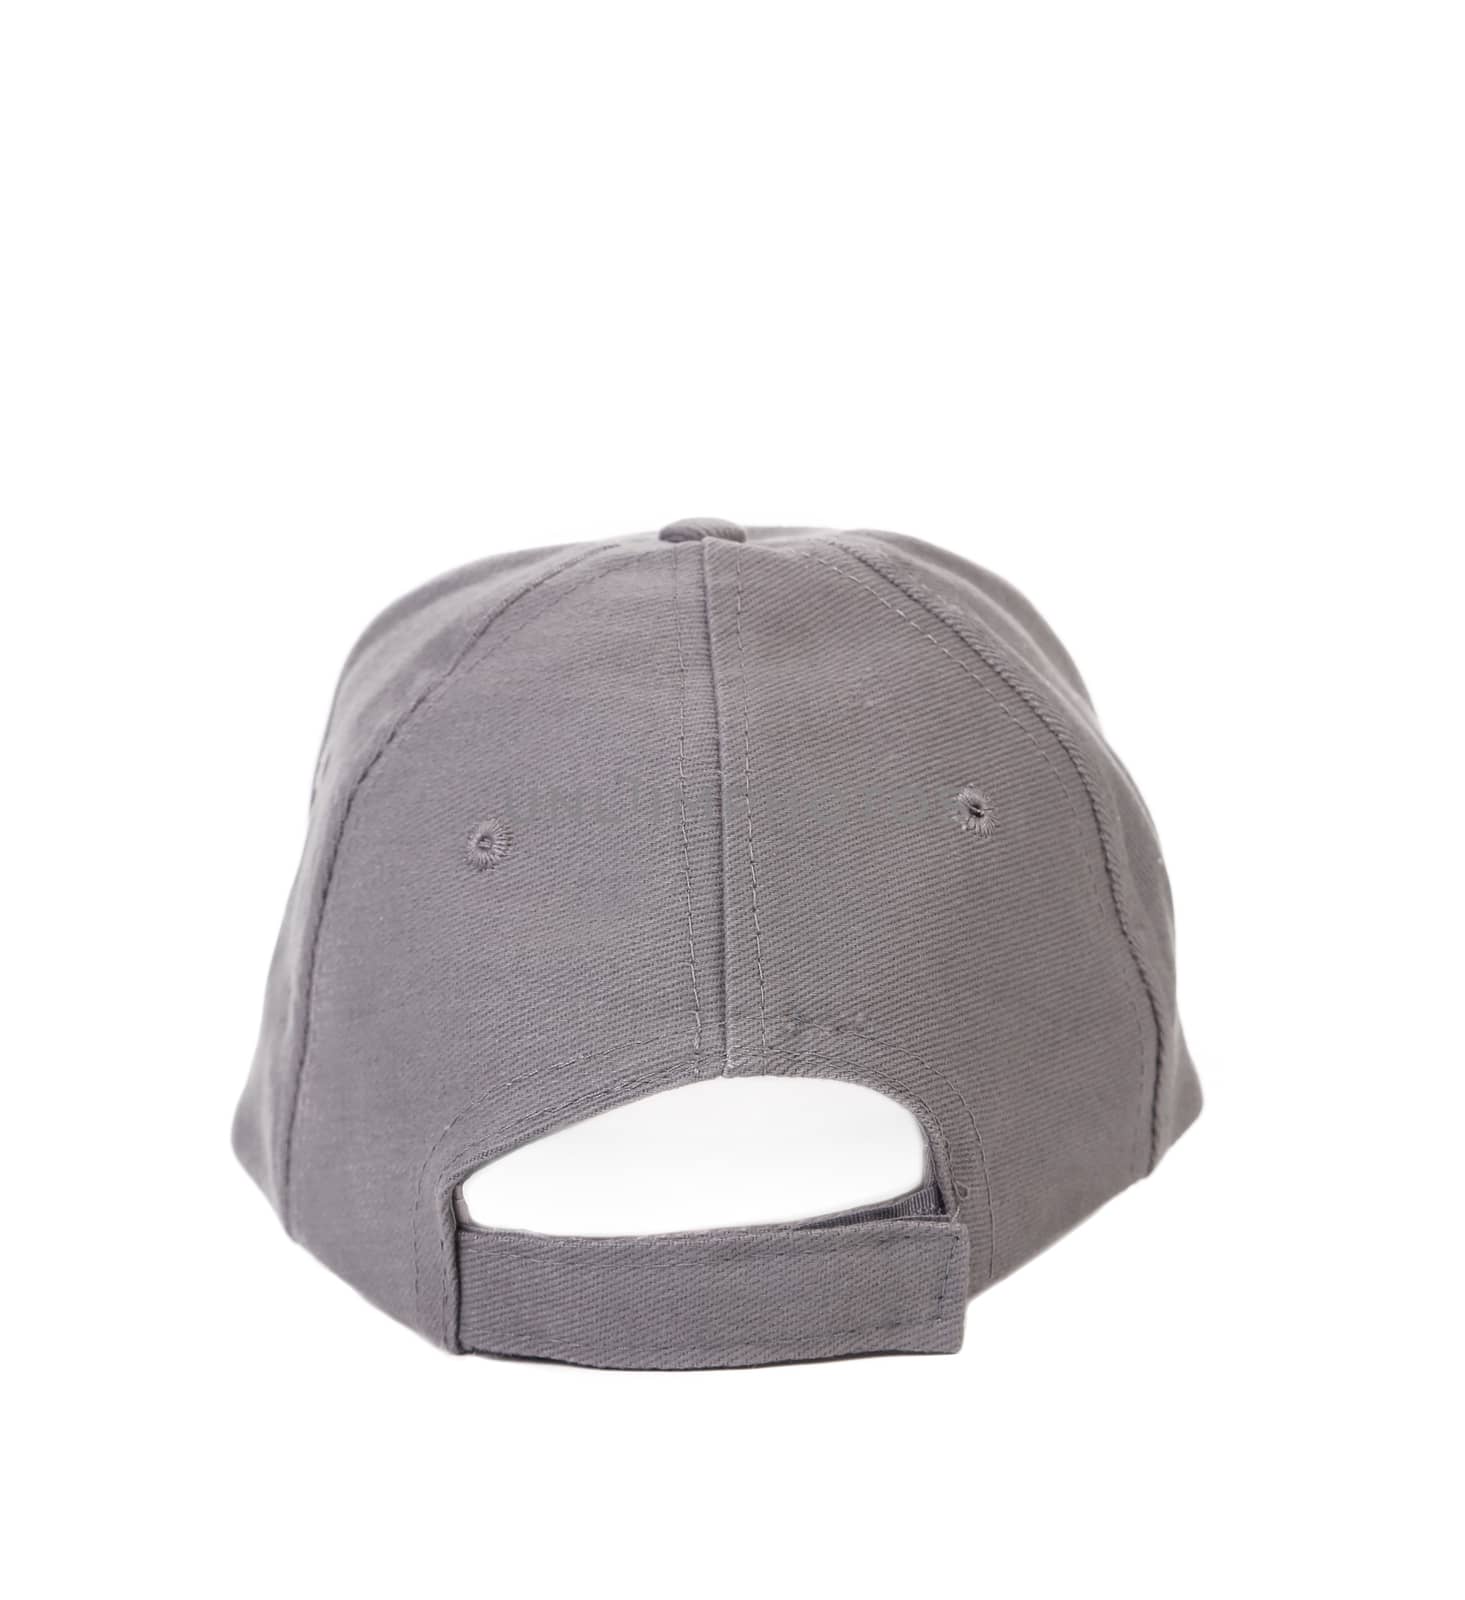 Working peaked cap. Back view. Isolated on a white background.